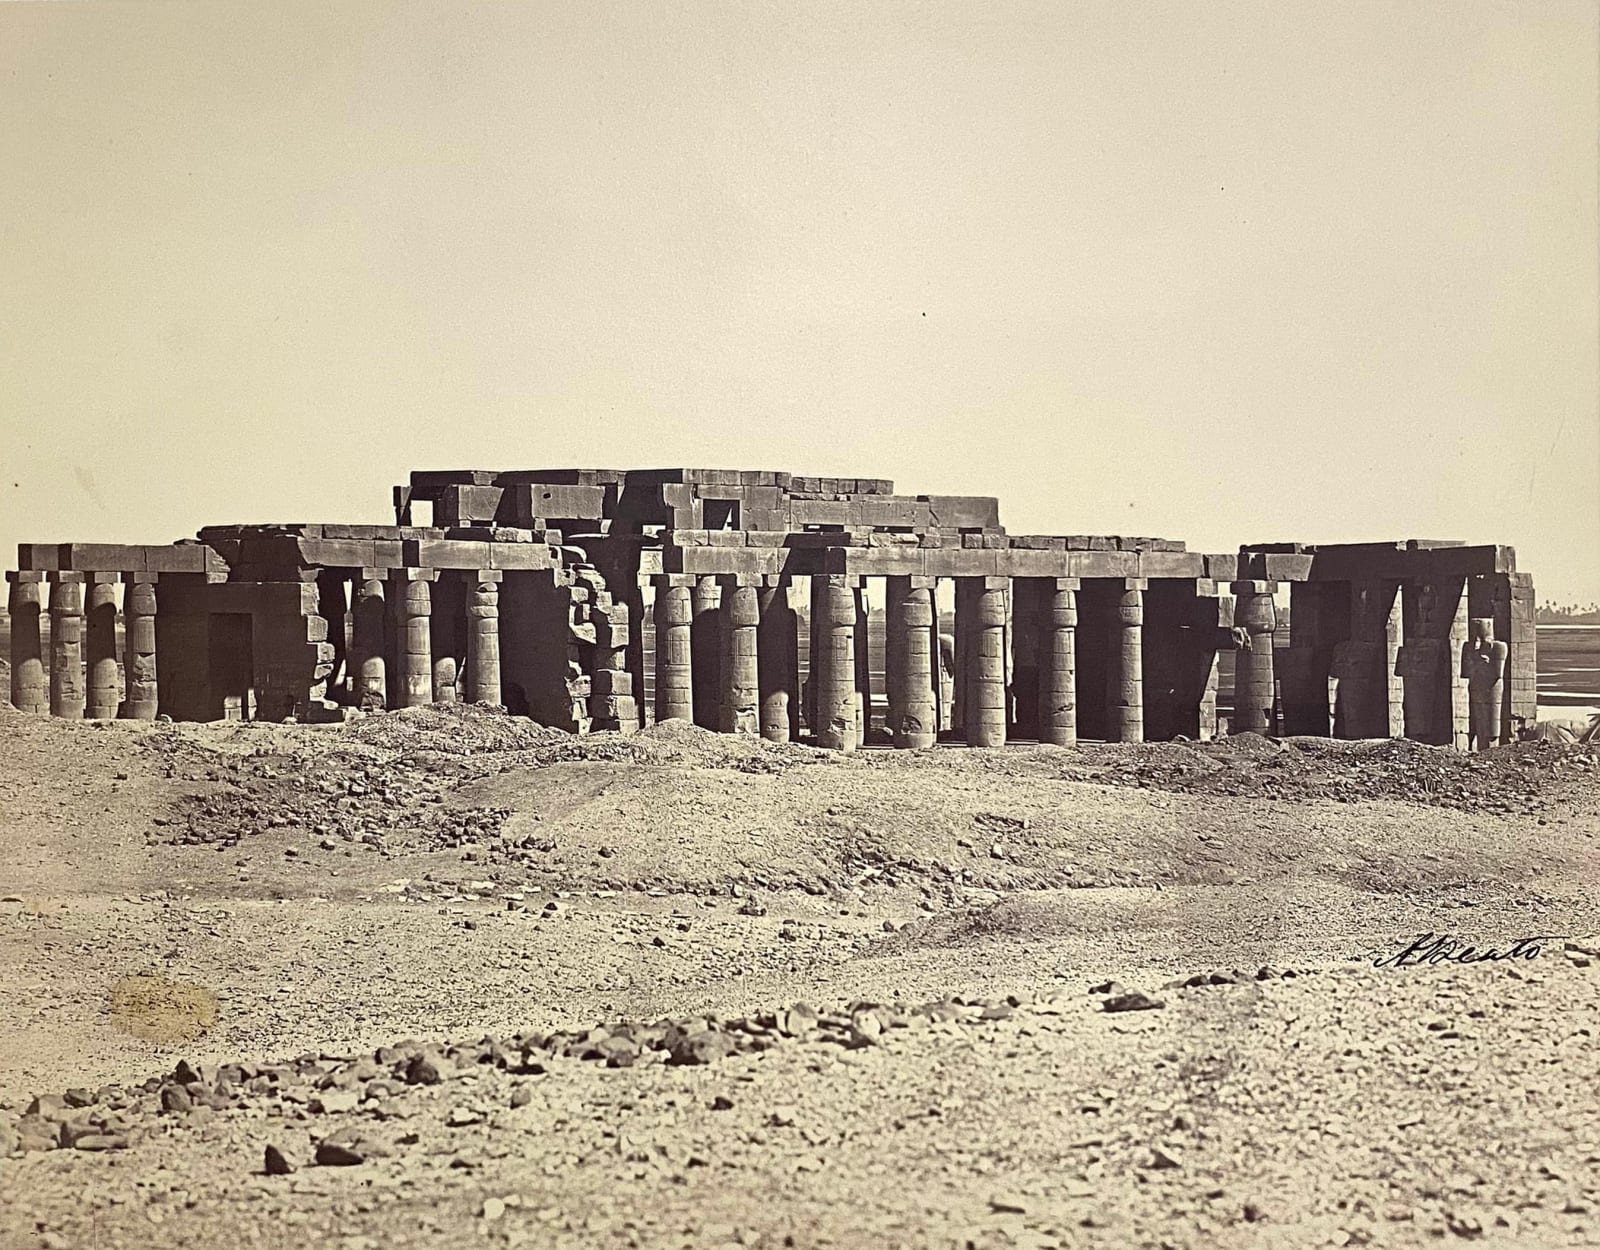 Antonio Beato, The Memnonium, or Ramesseum, The Temple from the South, Thebes, Egypt, c. 1887